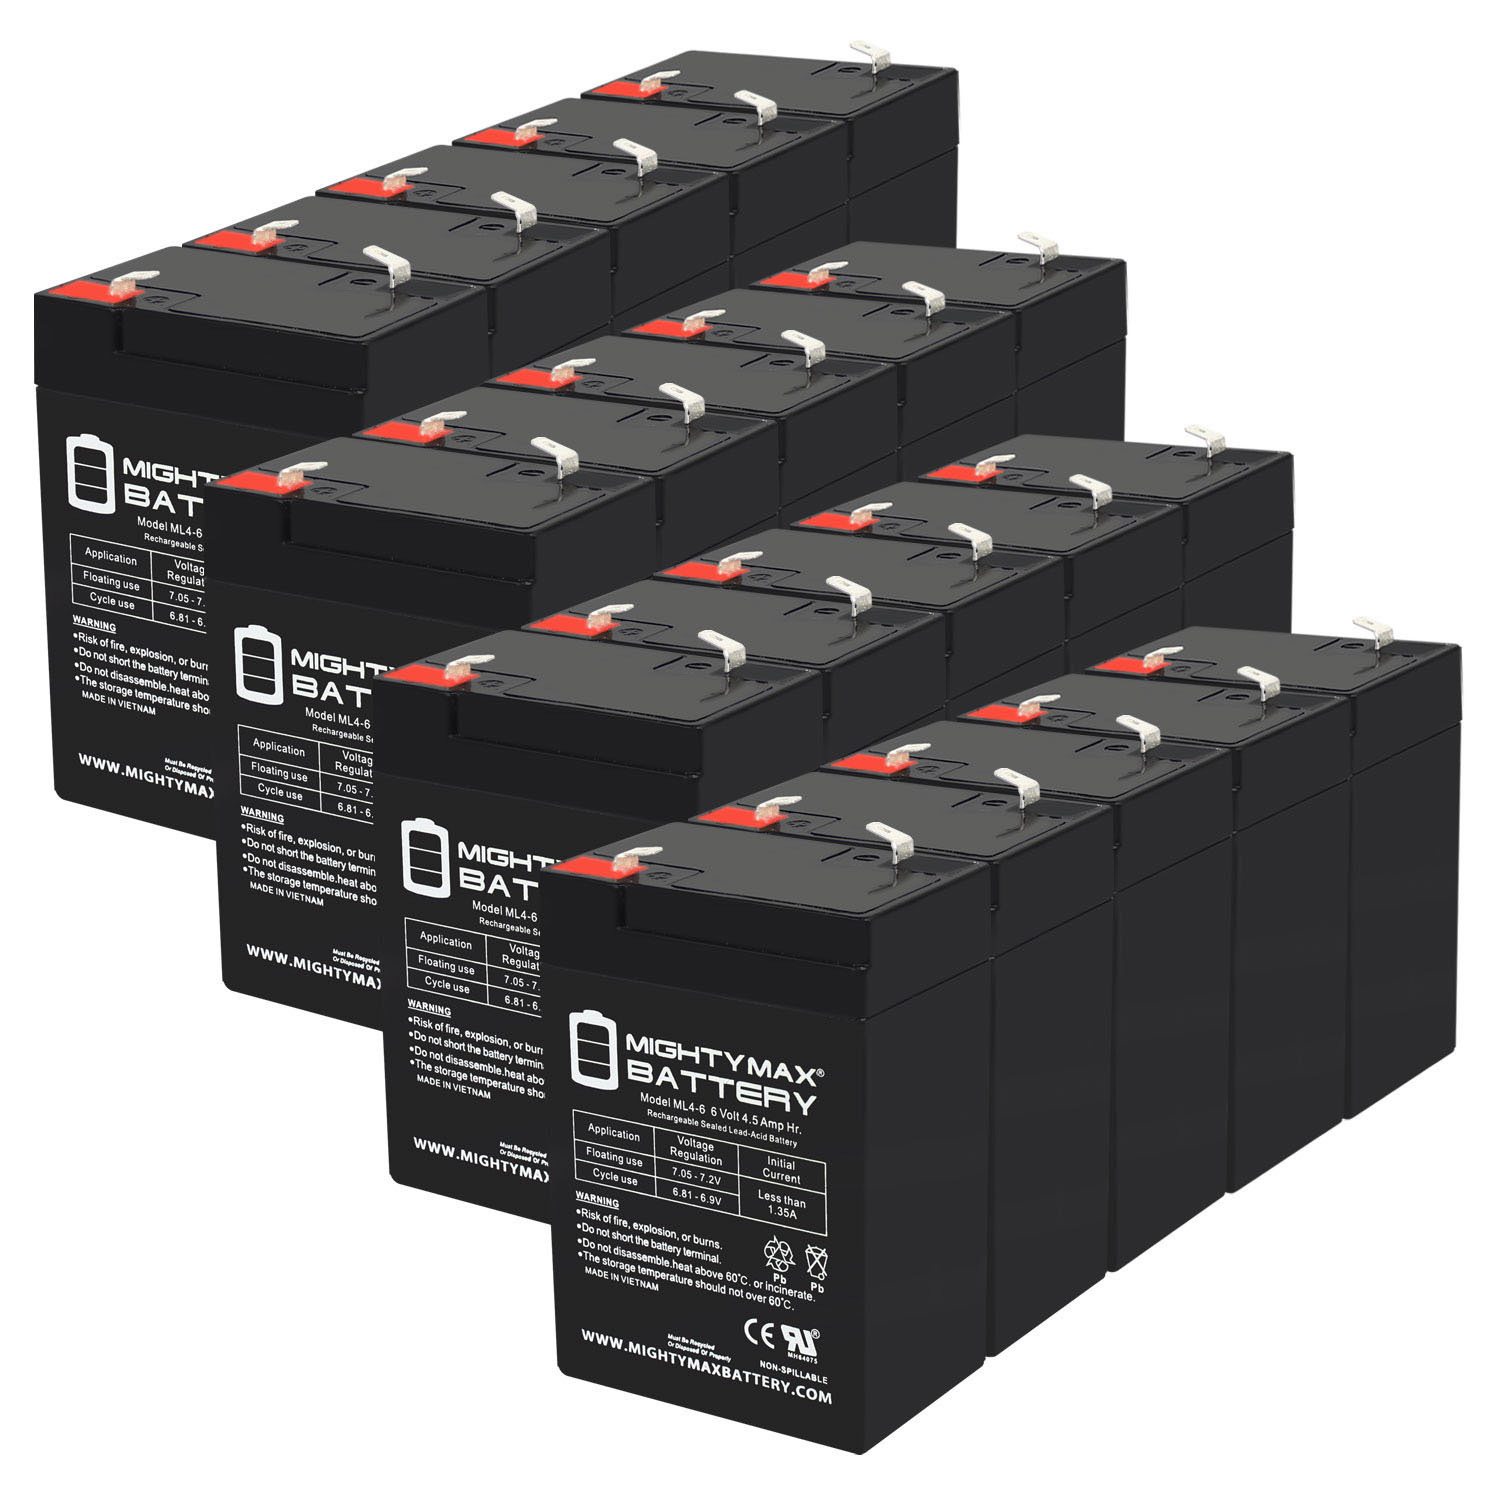 6V 4.5AH Replacement Battery for Tripp Lite Smart UPS 400 - 20 Pack